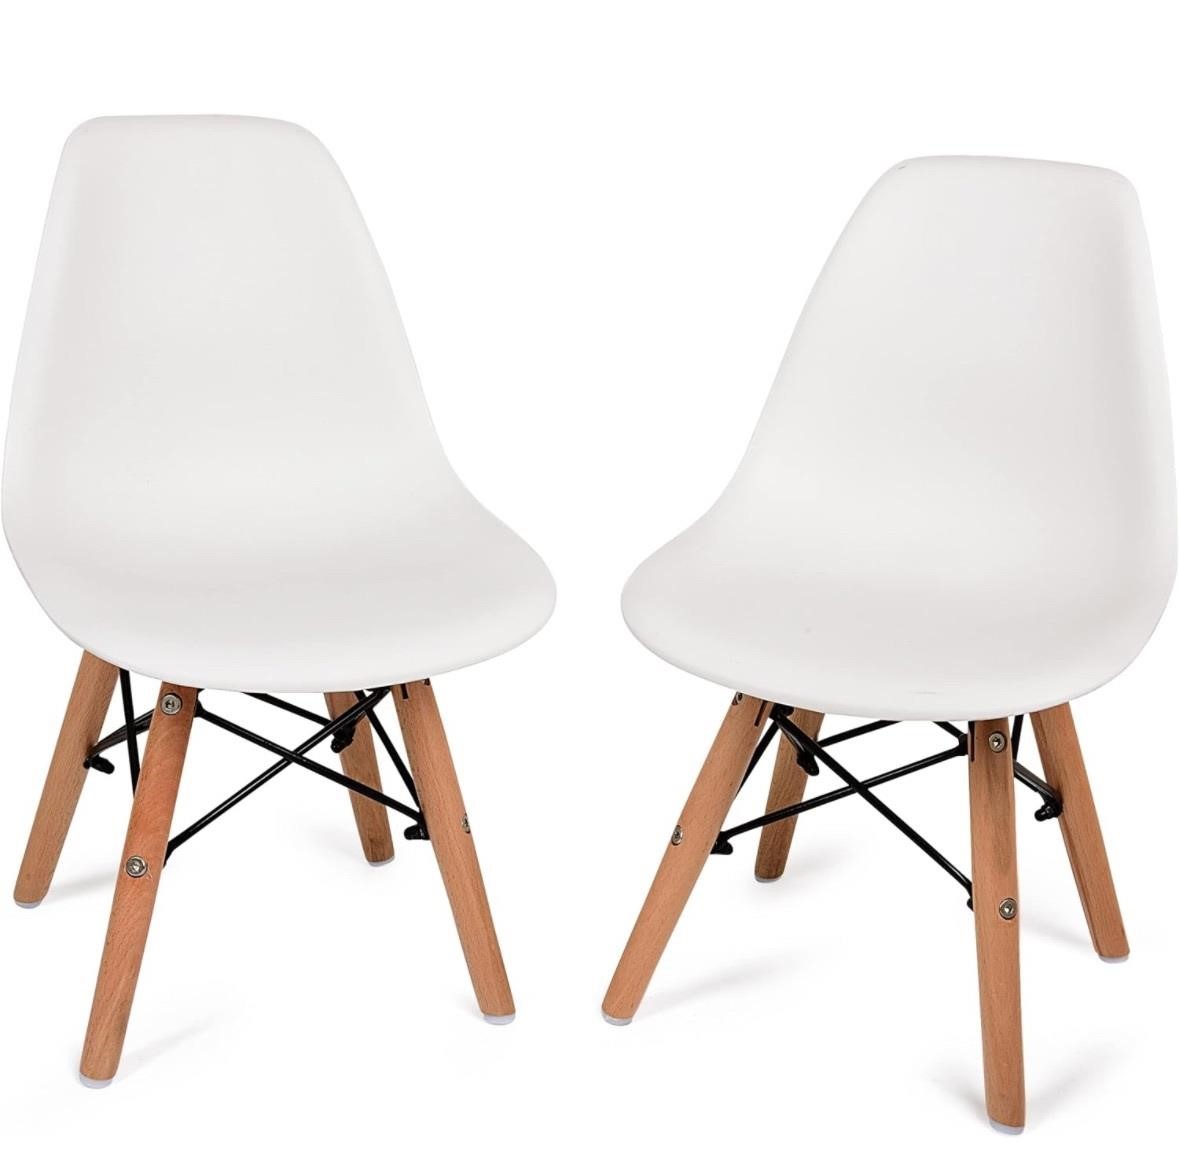 $87 Kids Modern Style Chairs Set of 2 White